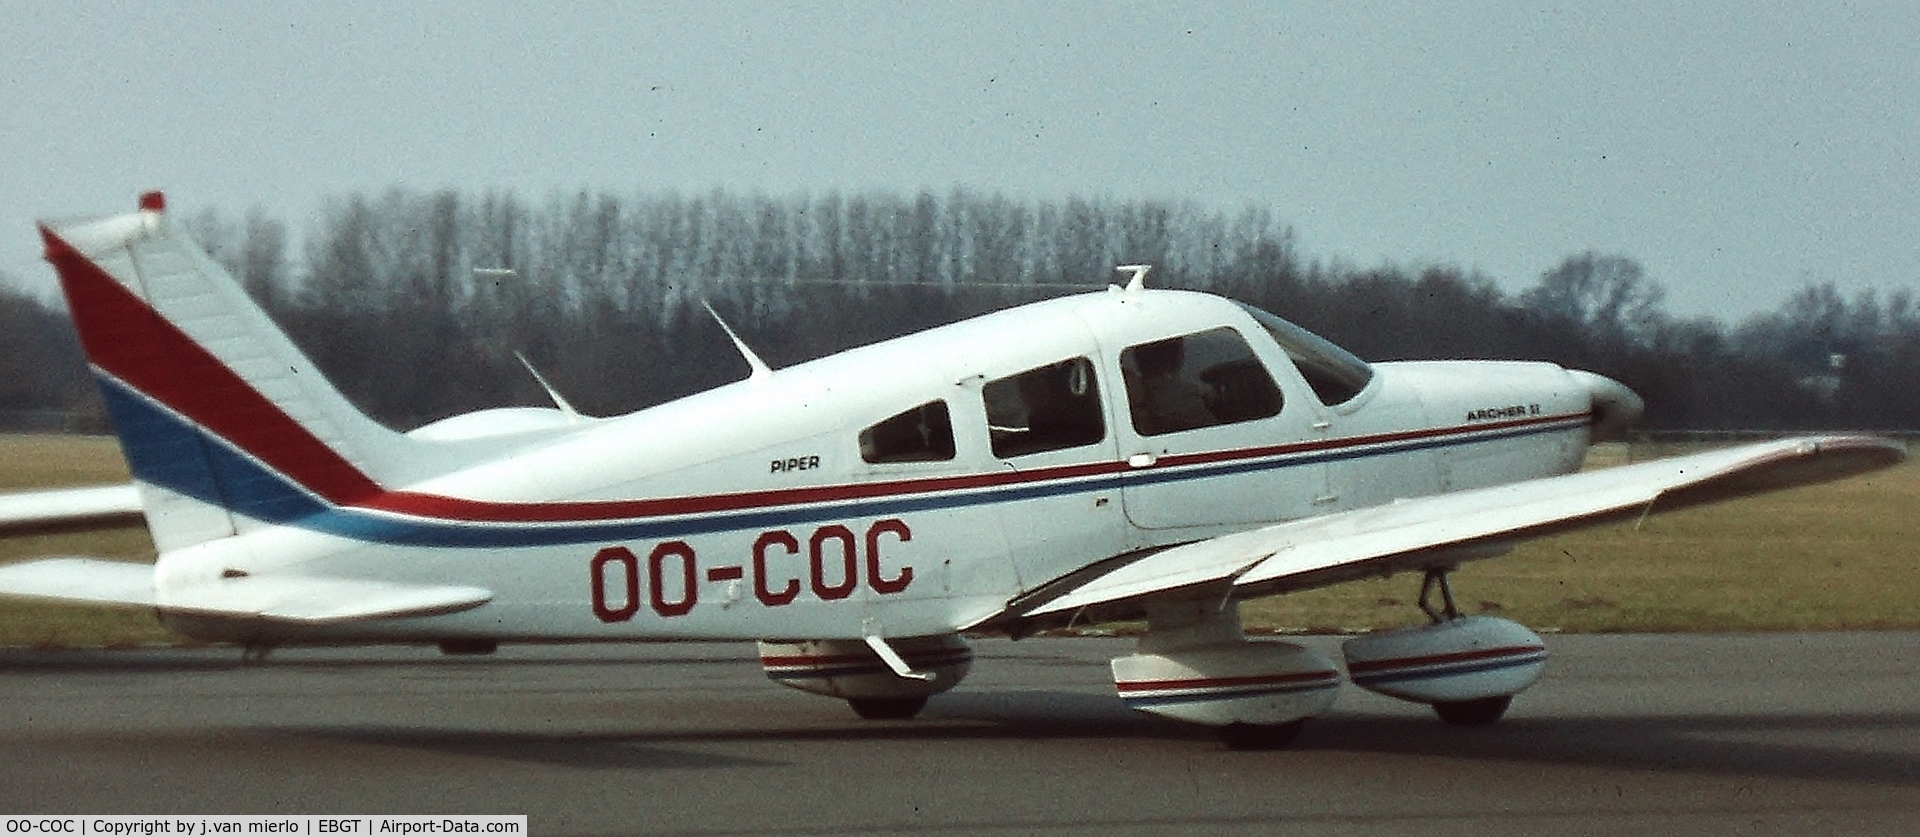 OO-COC, 1978 Piper PA-28-181 Archer II C/N 28-7890496, Ghent, Belgium end '70s